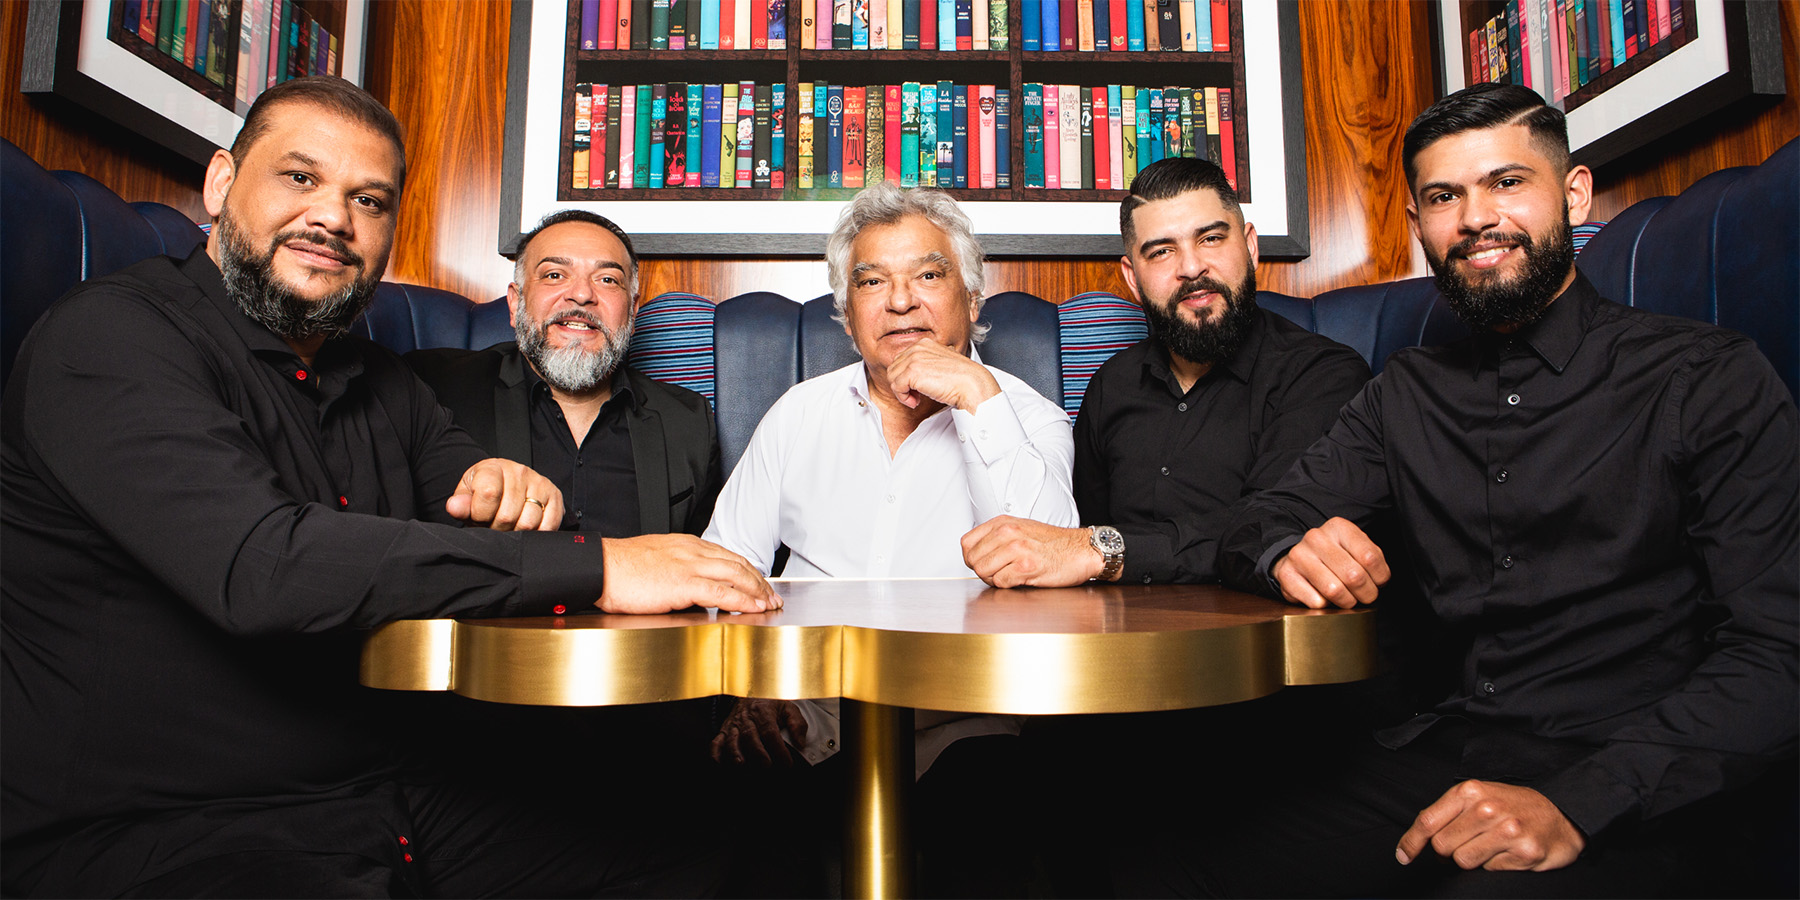 The Gipsy Kings, a world-renowned musical ensemble known for their unique fusion of flamenco, salsa and pop. 